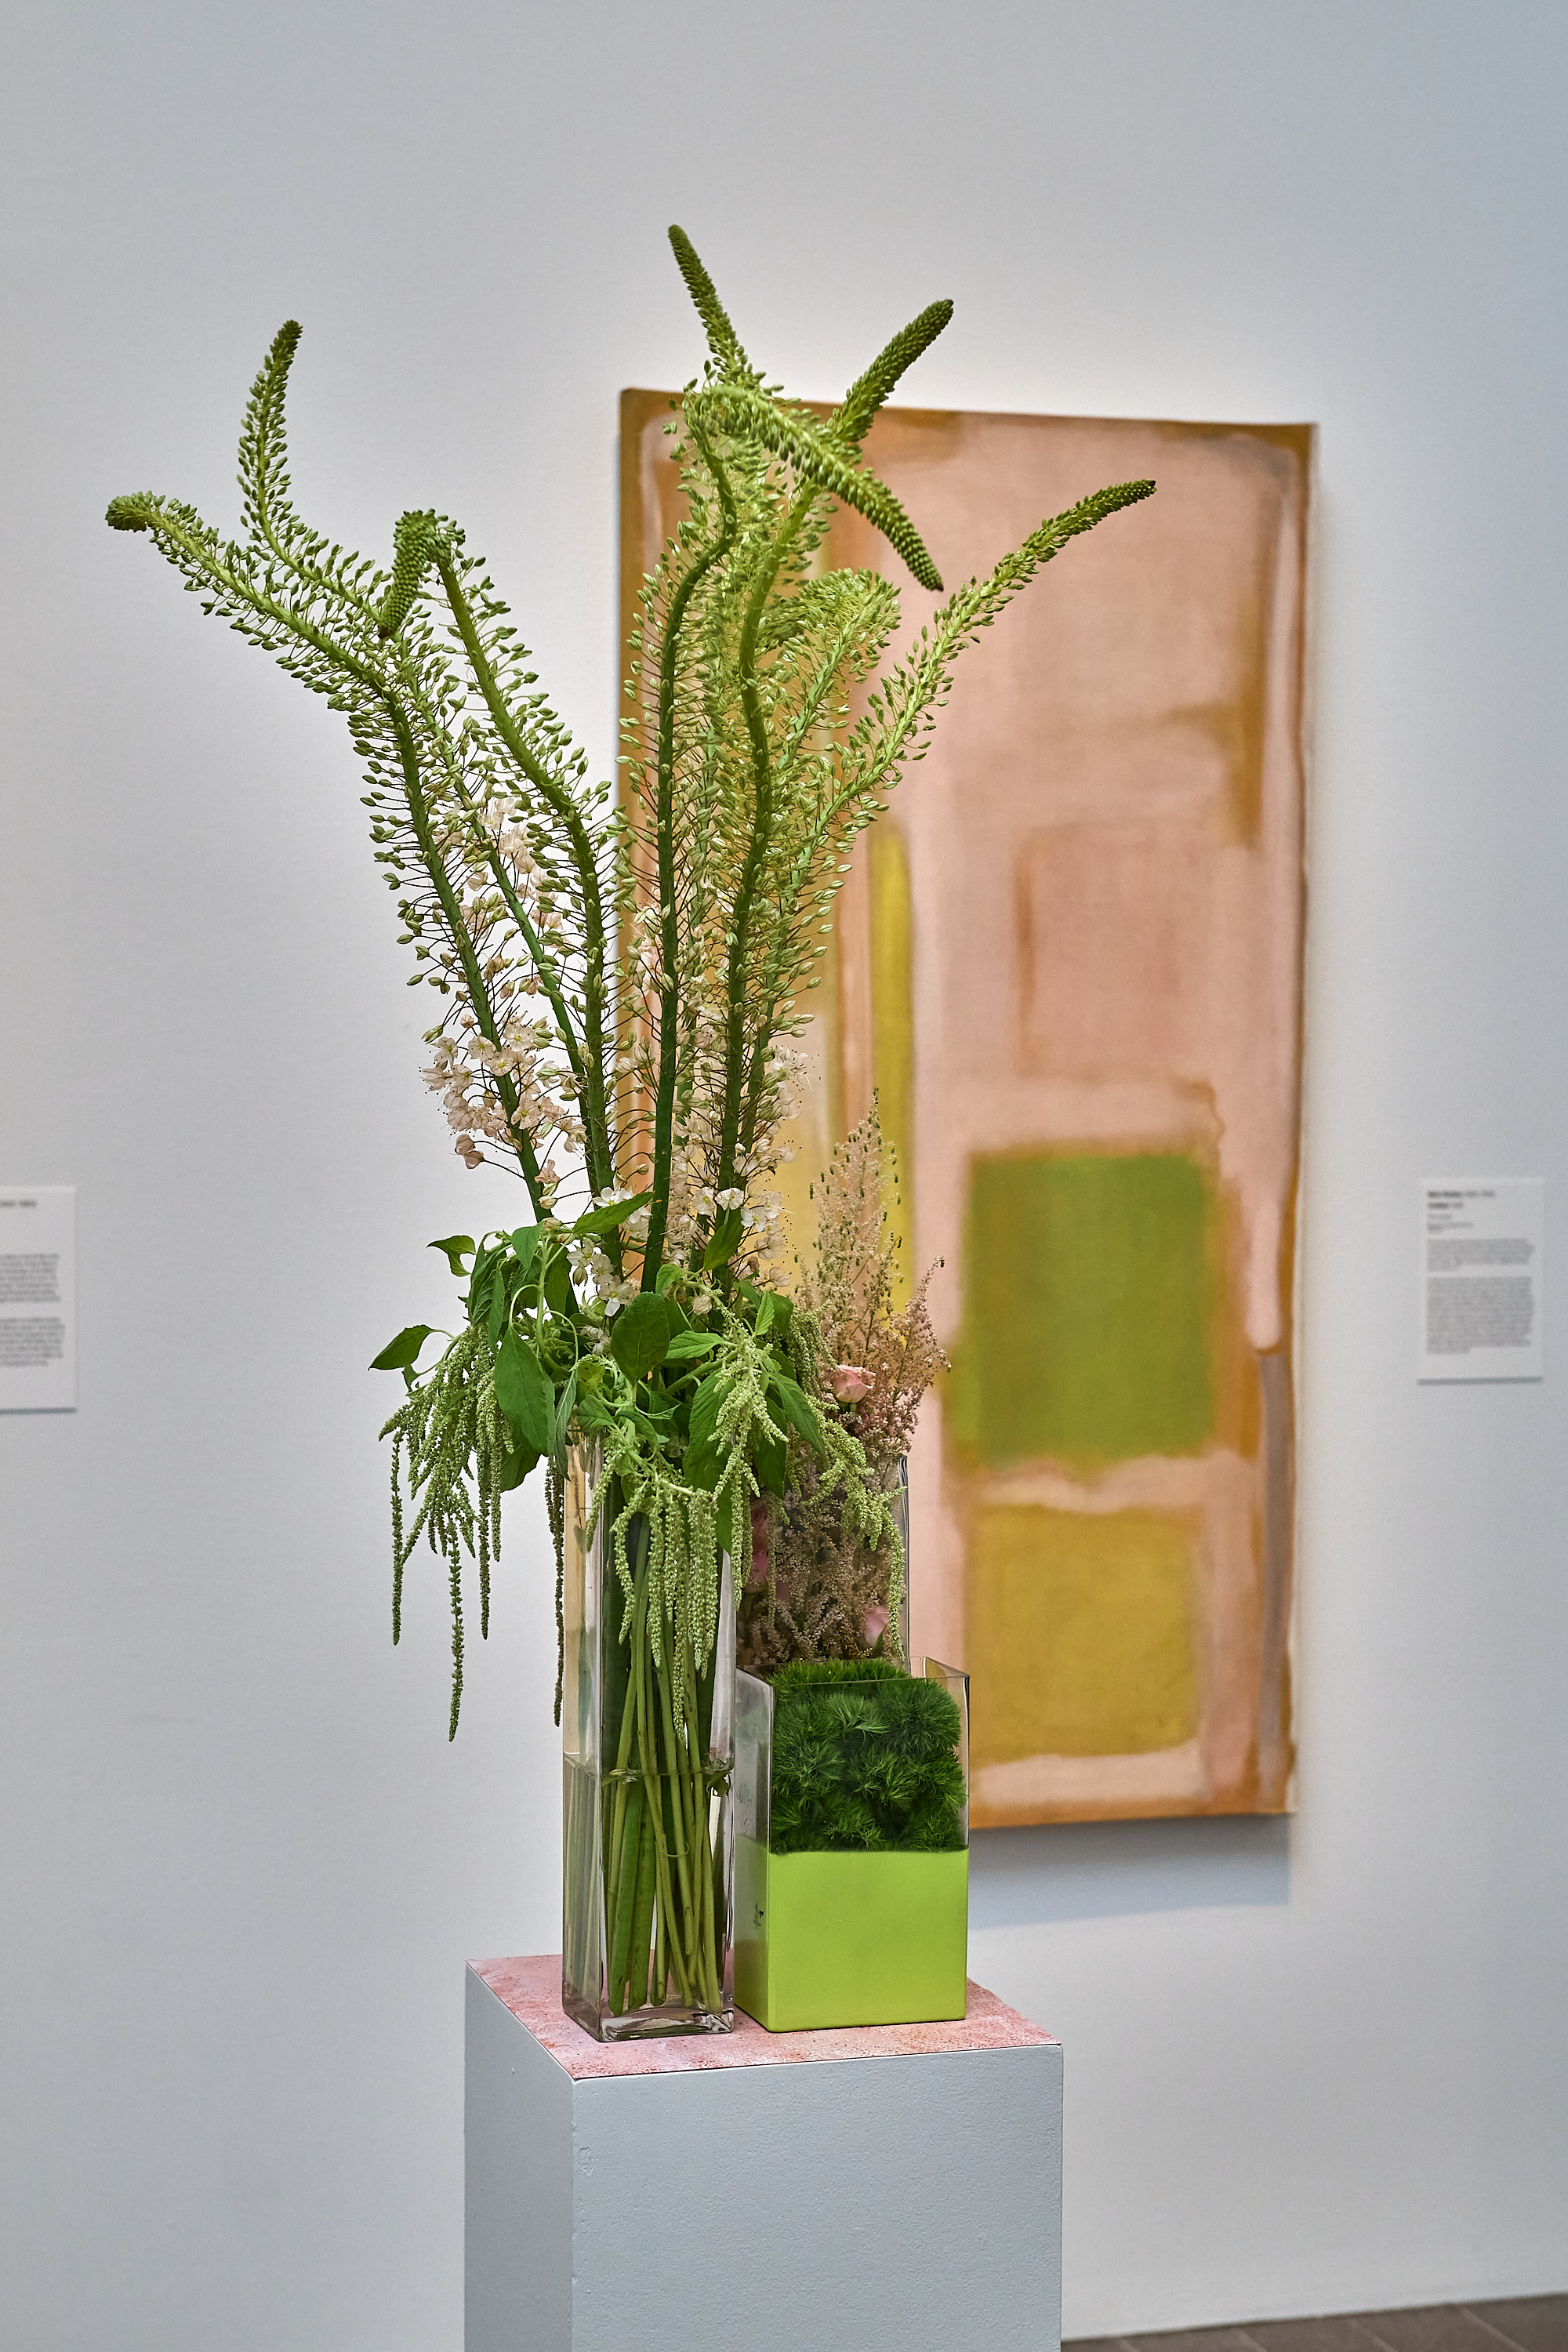 A glass vase filled with tall, green plants sits on a pedestal. Behind it, there's an abstract painting with muted pink and green colors on a white wall.